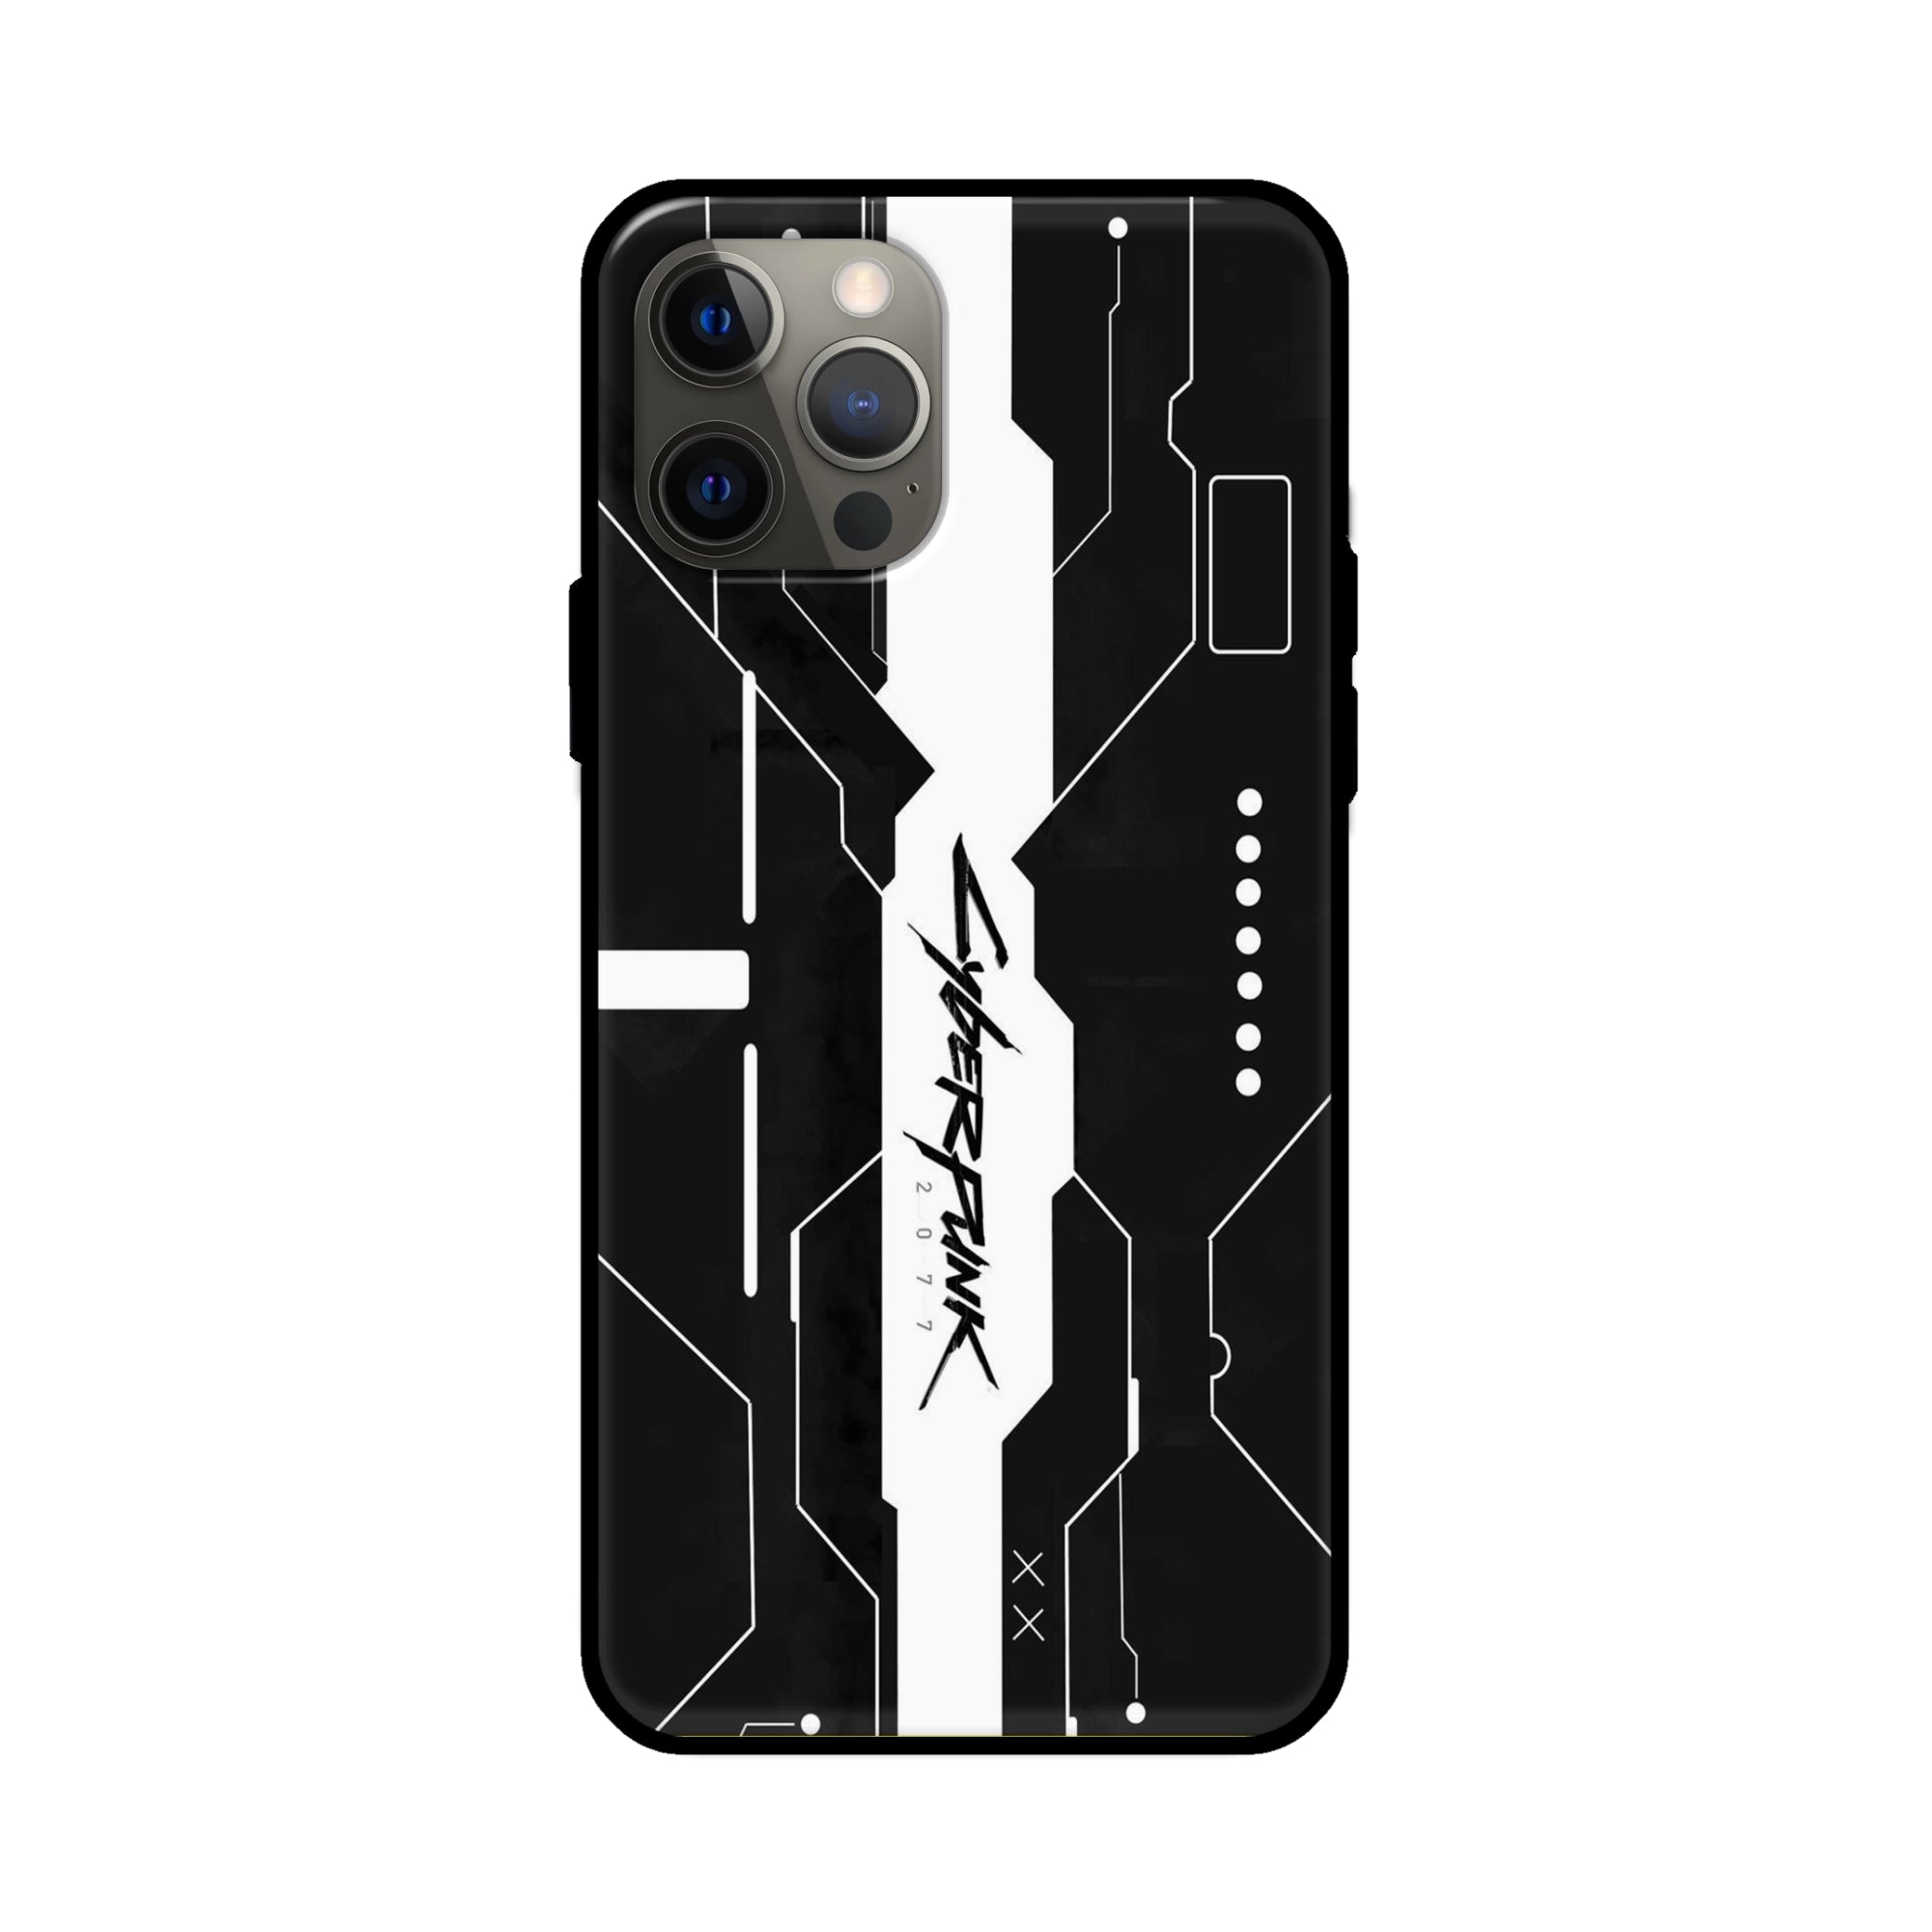 Buy Cyberpunk 2077 Art Glass/Metal Back Mobile Phone Case/Cover For Apple iPhone 12 pro Online